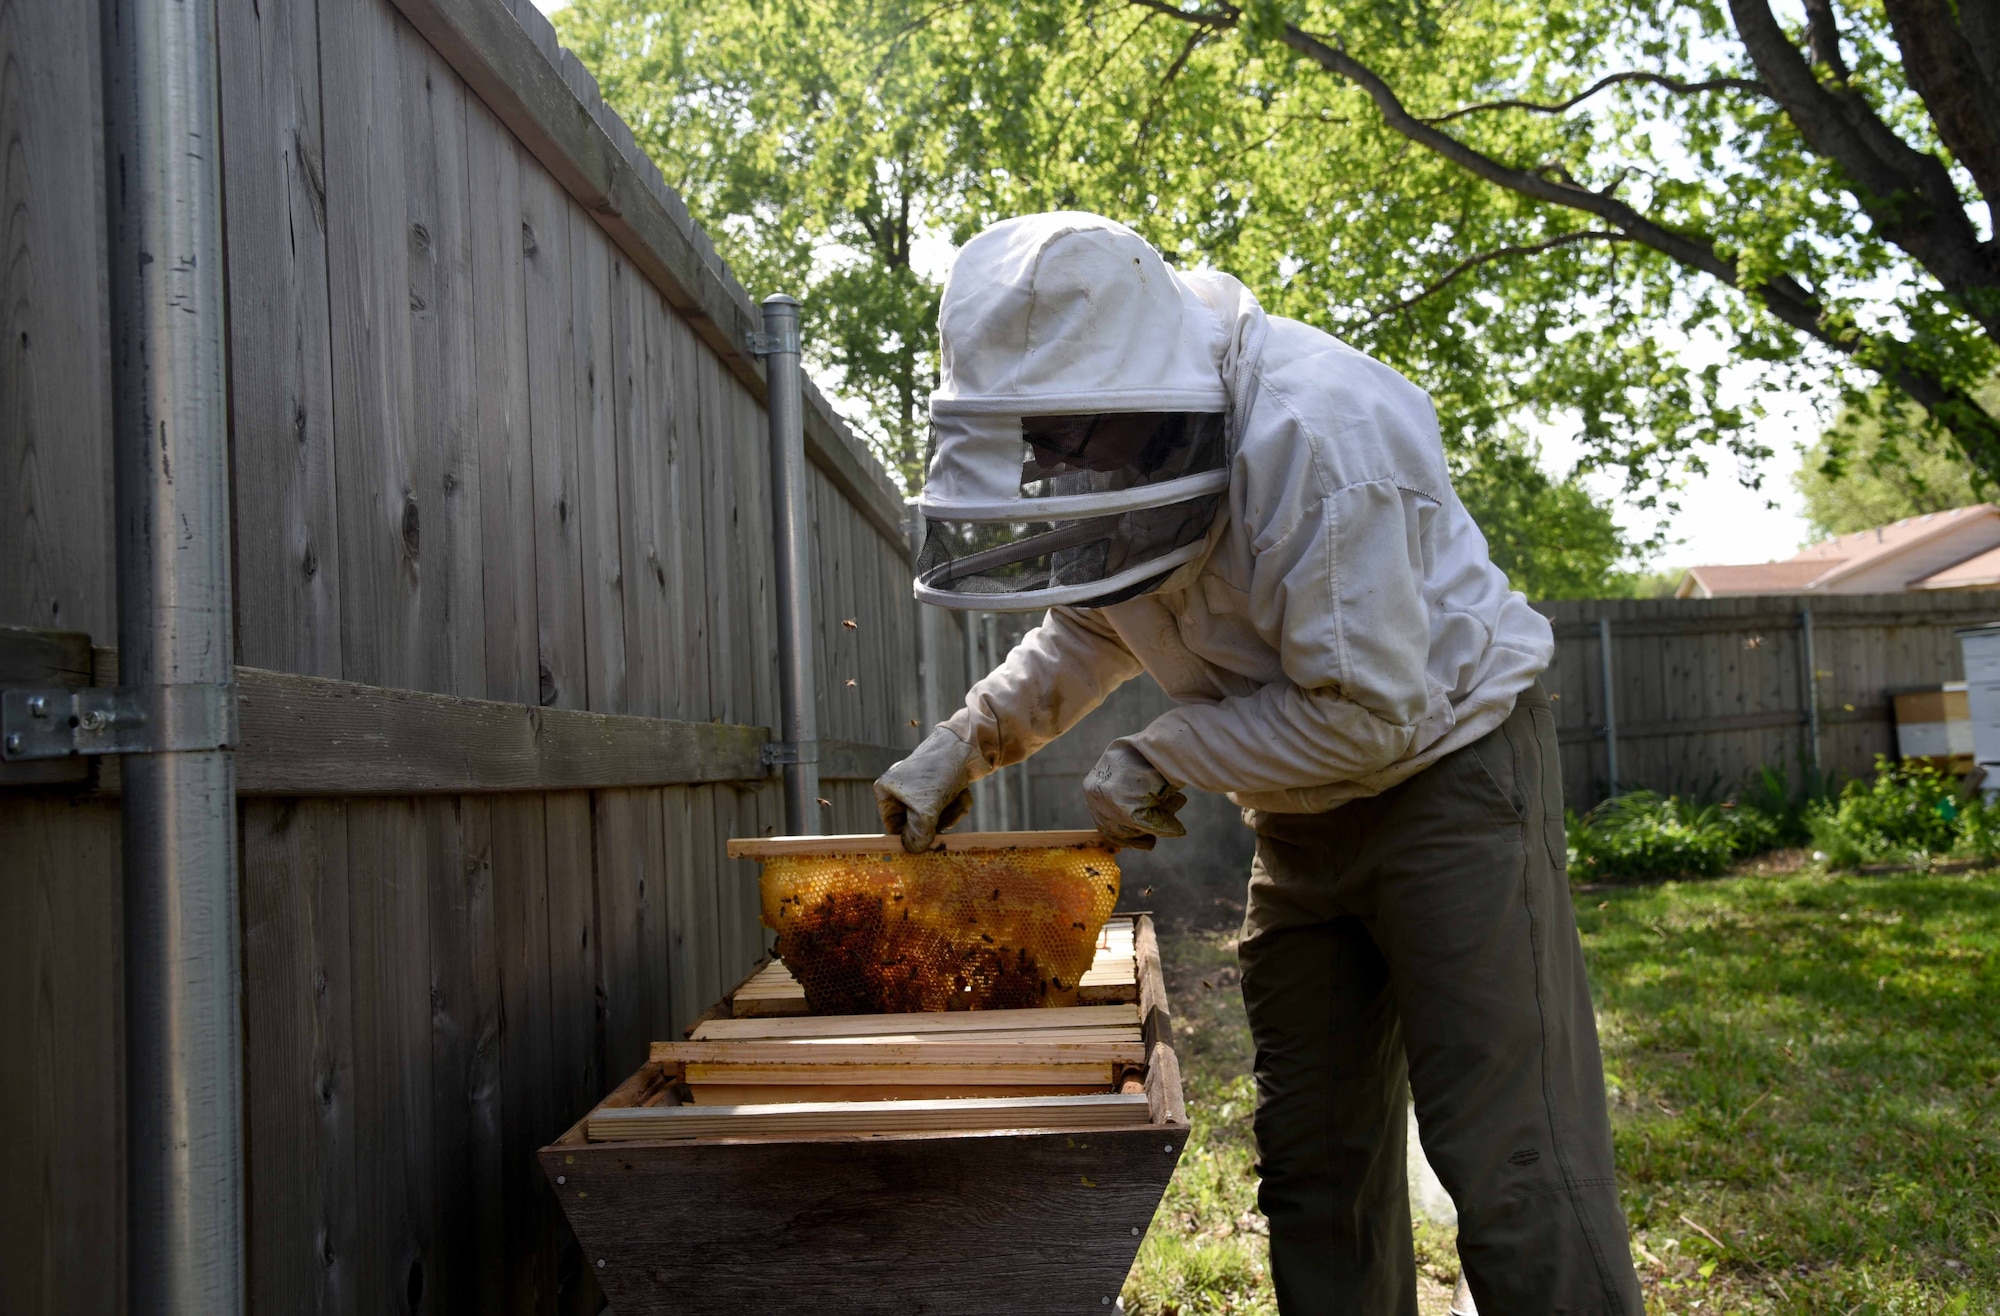 Tech. Sgt. Garrett Wright, 22nd Operations Support Squadron Survival Evasion Resistance and Escape and Personnel Recovery specialist, inspects one of his honeybee hives April 24, 2017, in Derby, Kan. Wright started beekeeping last year and now has five different hives in his backyard. (U.S. Air Force photo/Airman 1st Class Erin McClellan)